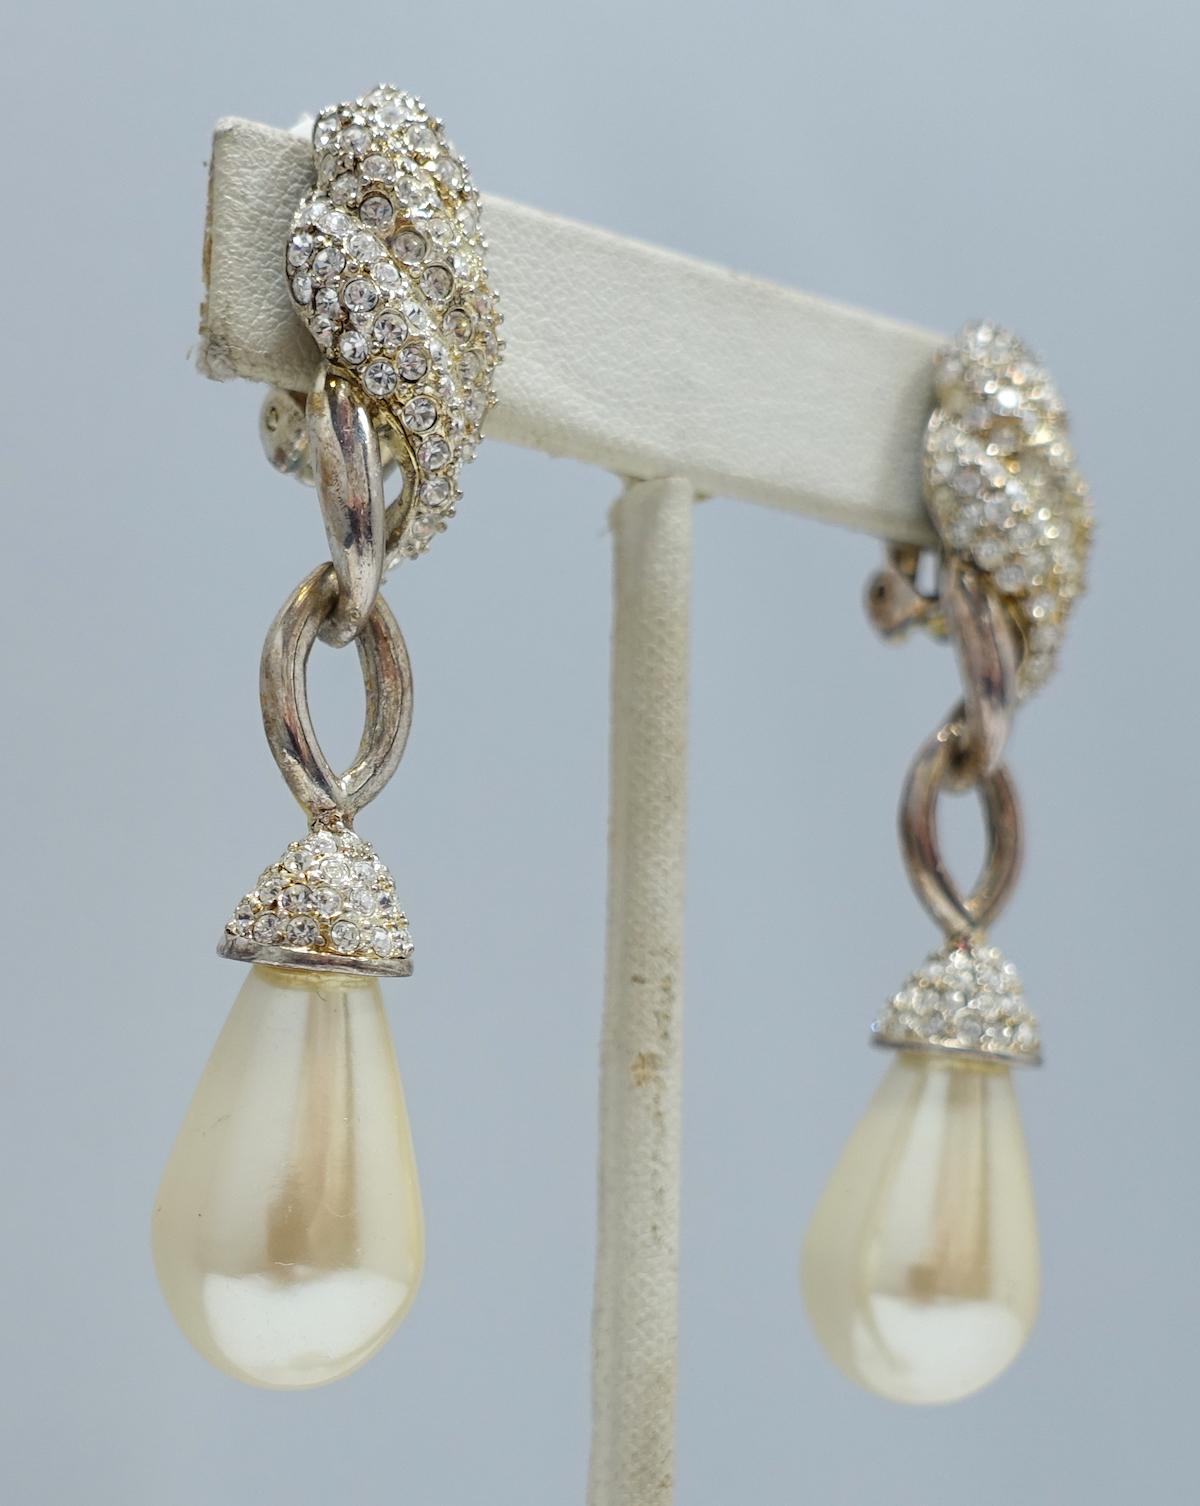 These vintage signed Carre earrings has a teardrop faux pearl with clear crystal accents in a silver tone setting.  In excellent condition, these clip earrings measure 2-3/4” x 5/8” and are signed “Carre”.